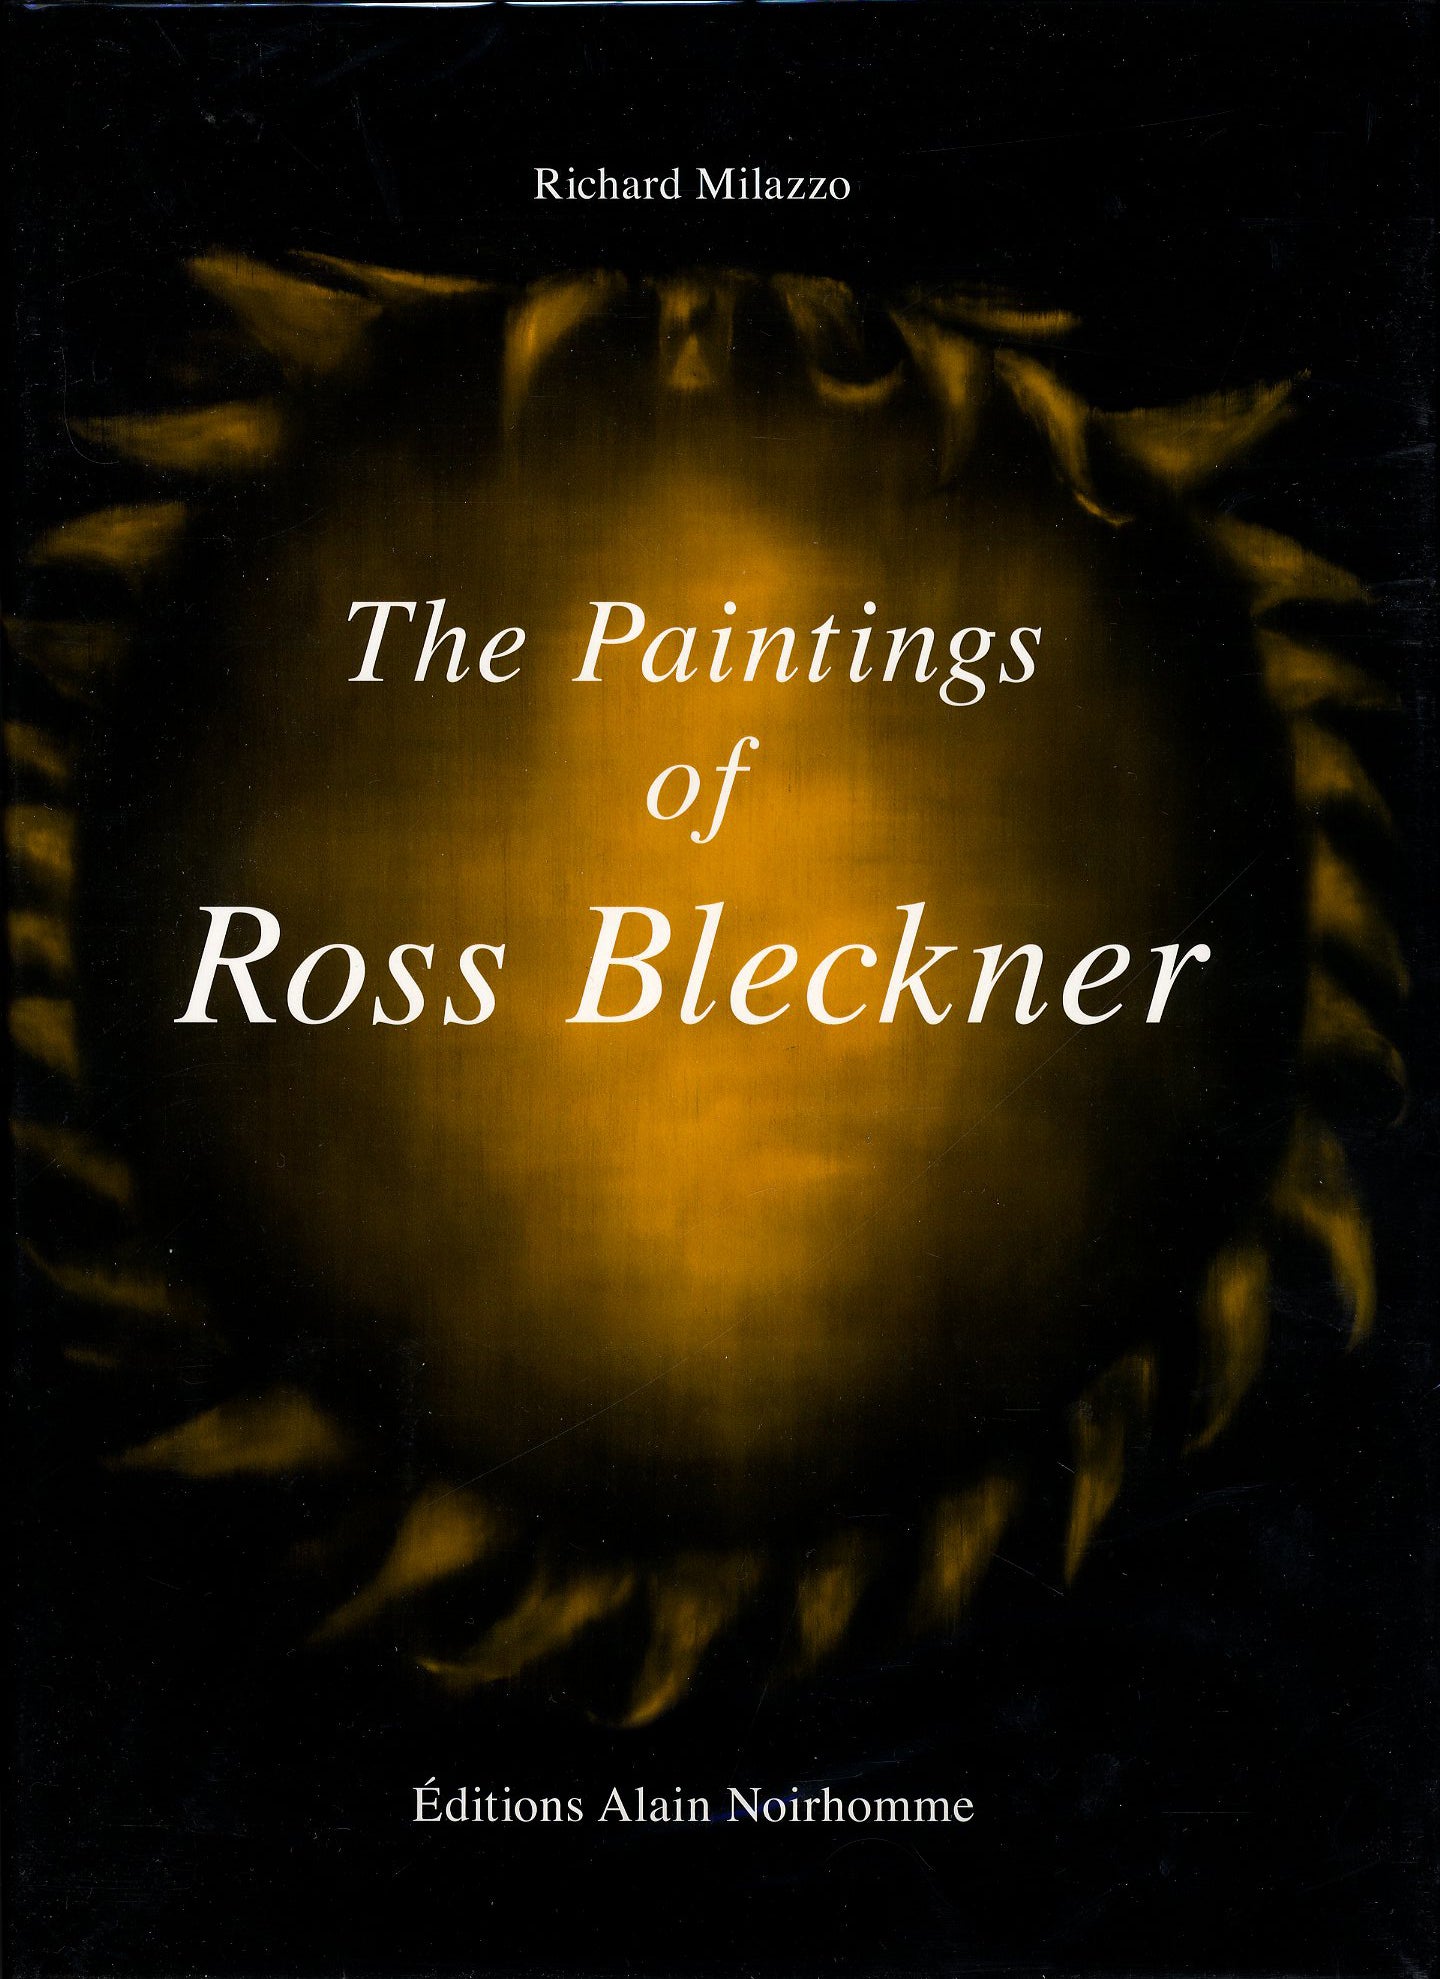 The Paintings of Ross Bleckner (Editions Alain Noirhomme) [SIGNED]